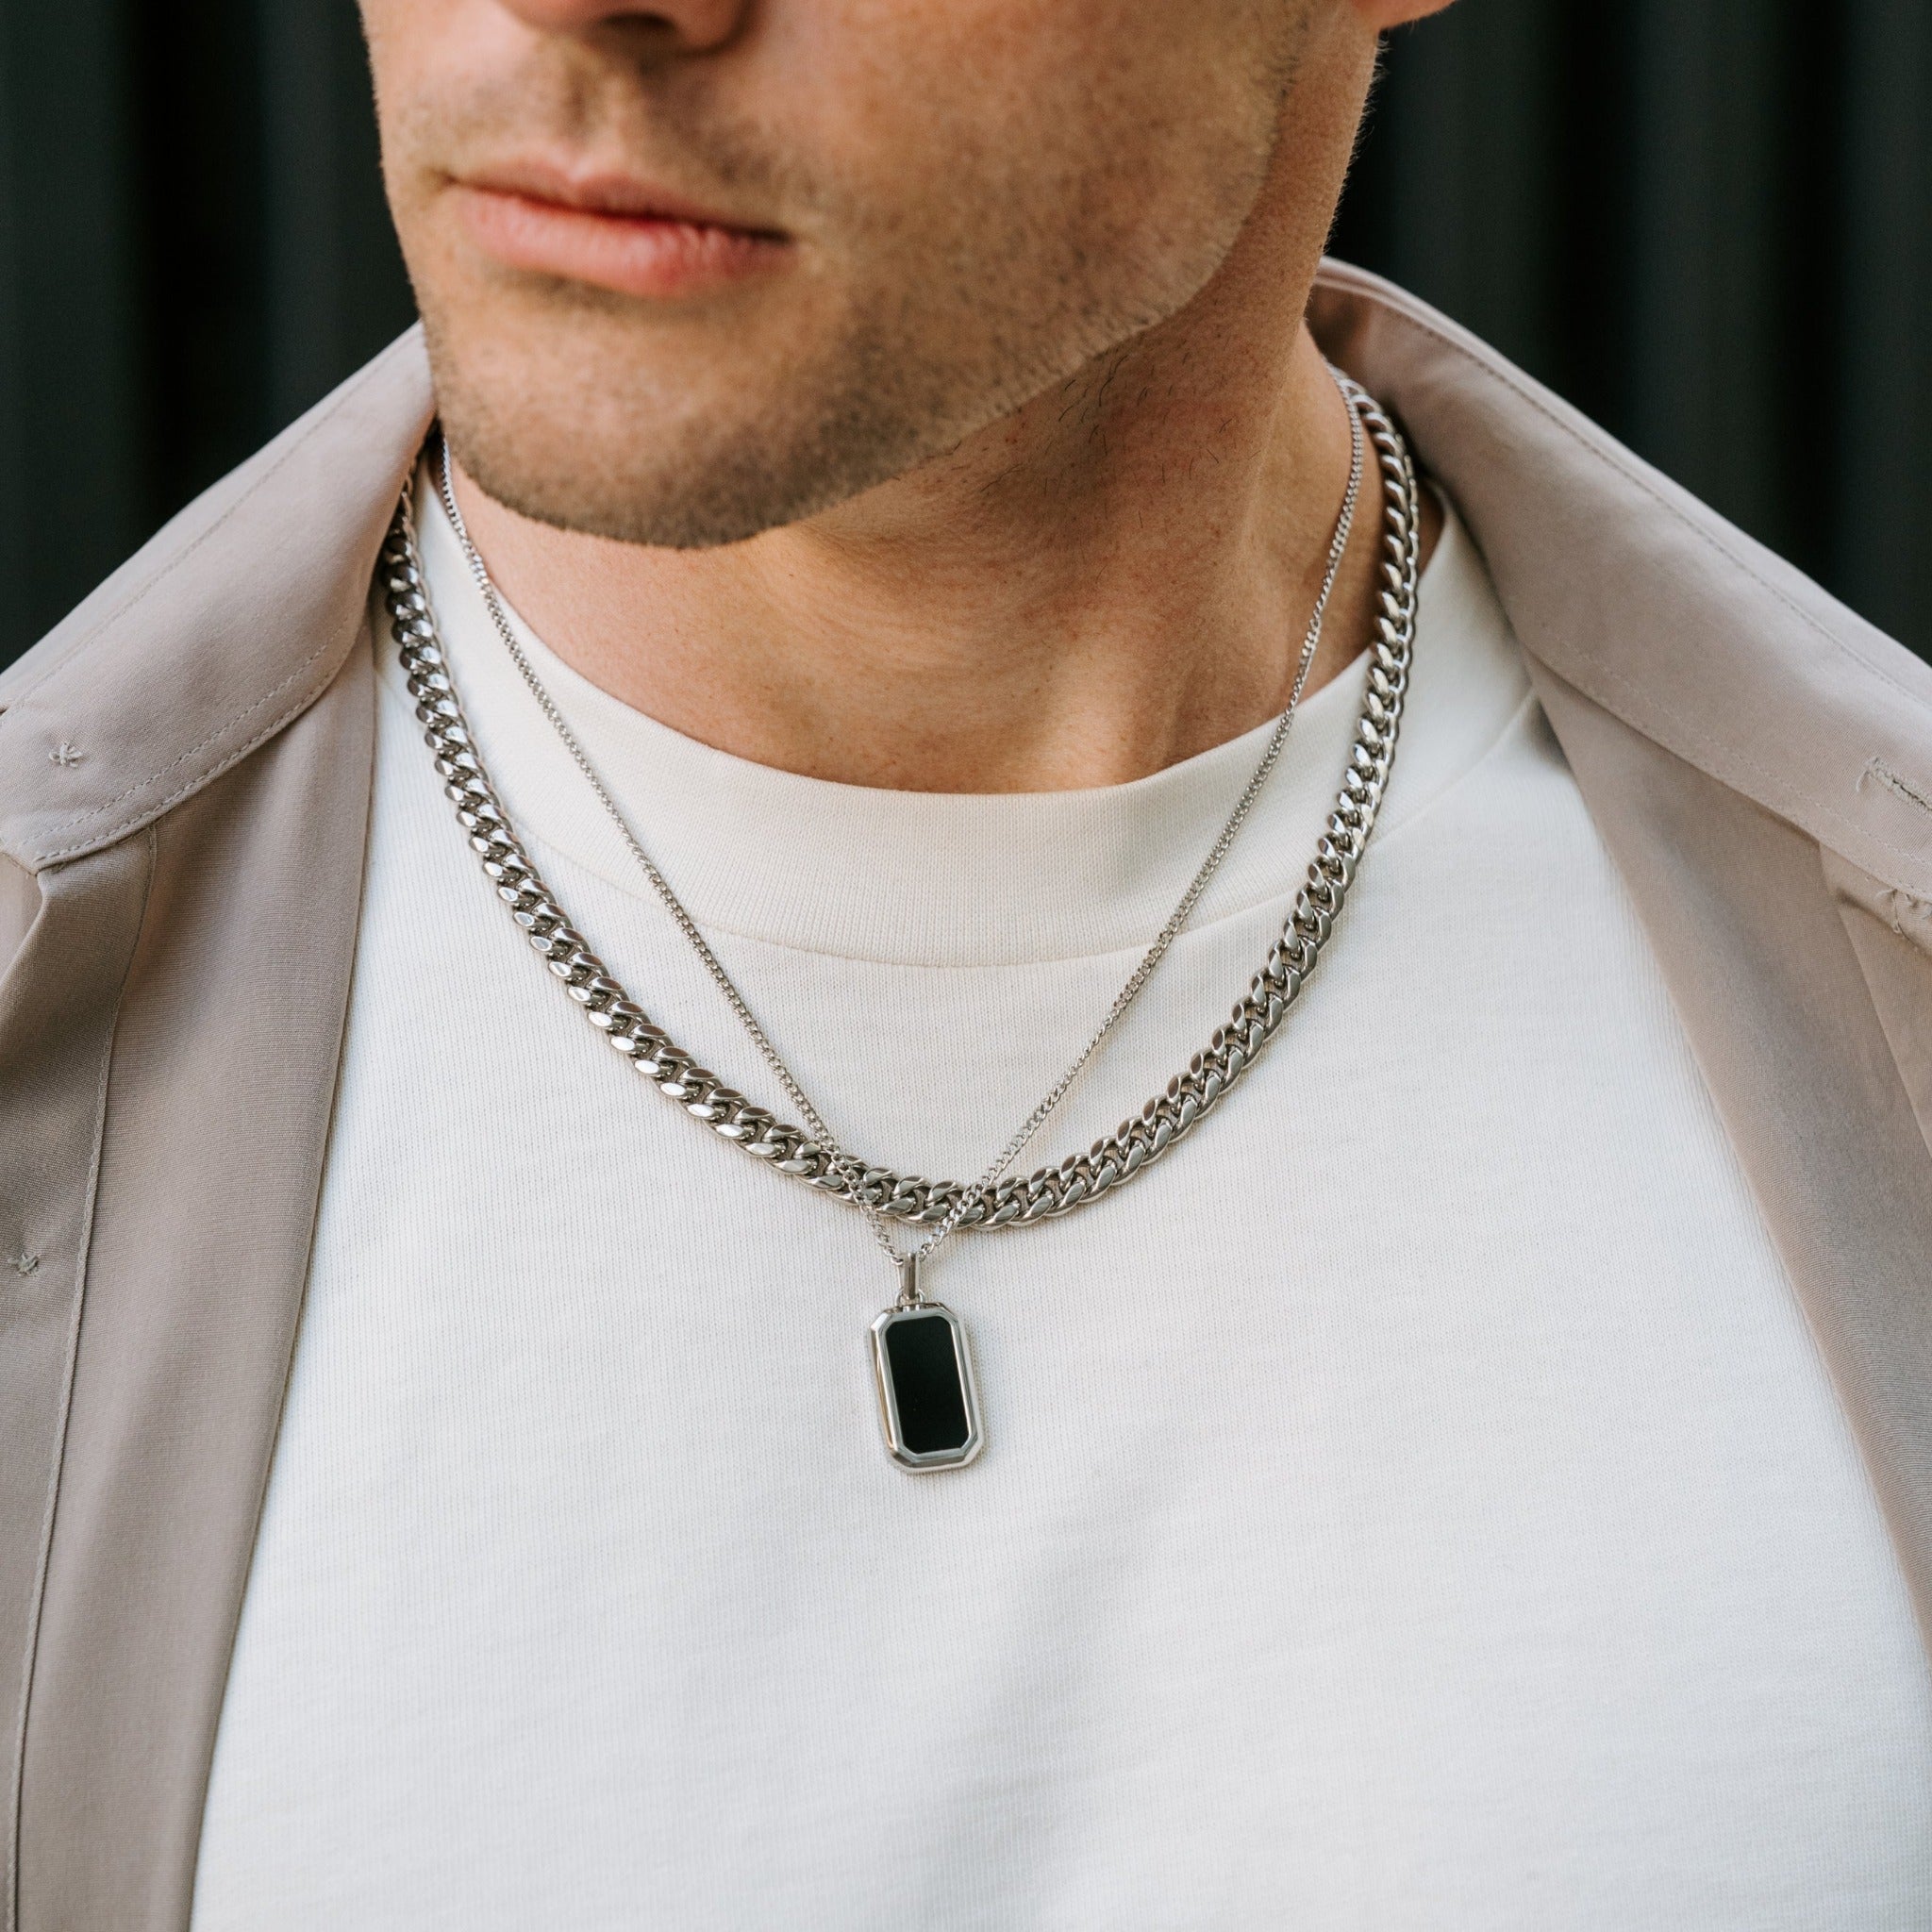 Stainless Steel and Natural Agate Crystal Pendant with Stainless Steel Necklace Chain. Stainless Steel Cuban Link Chain.